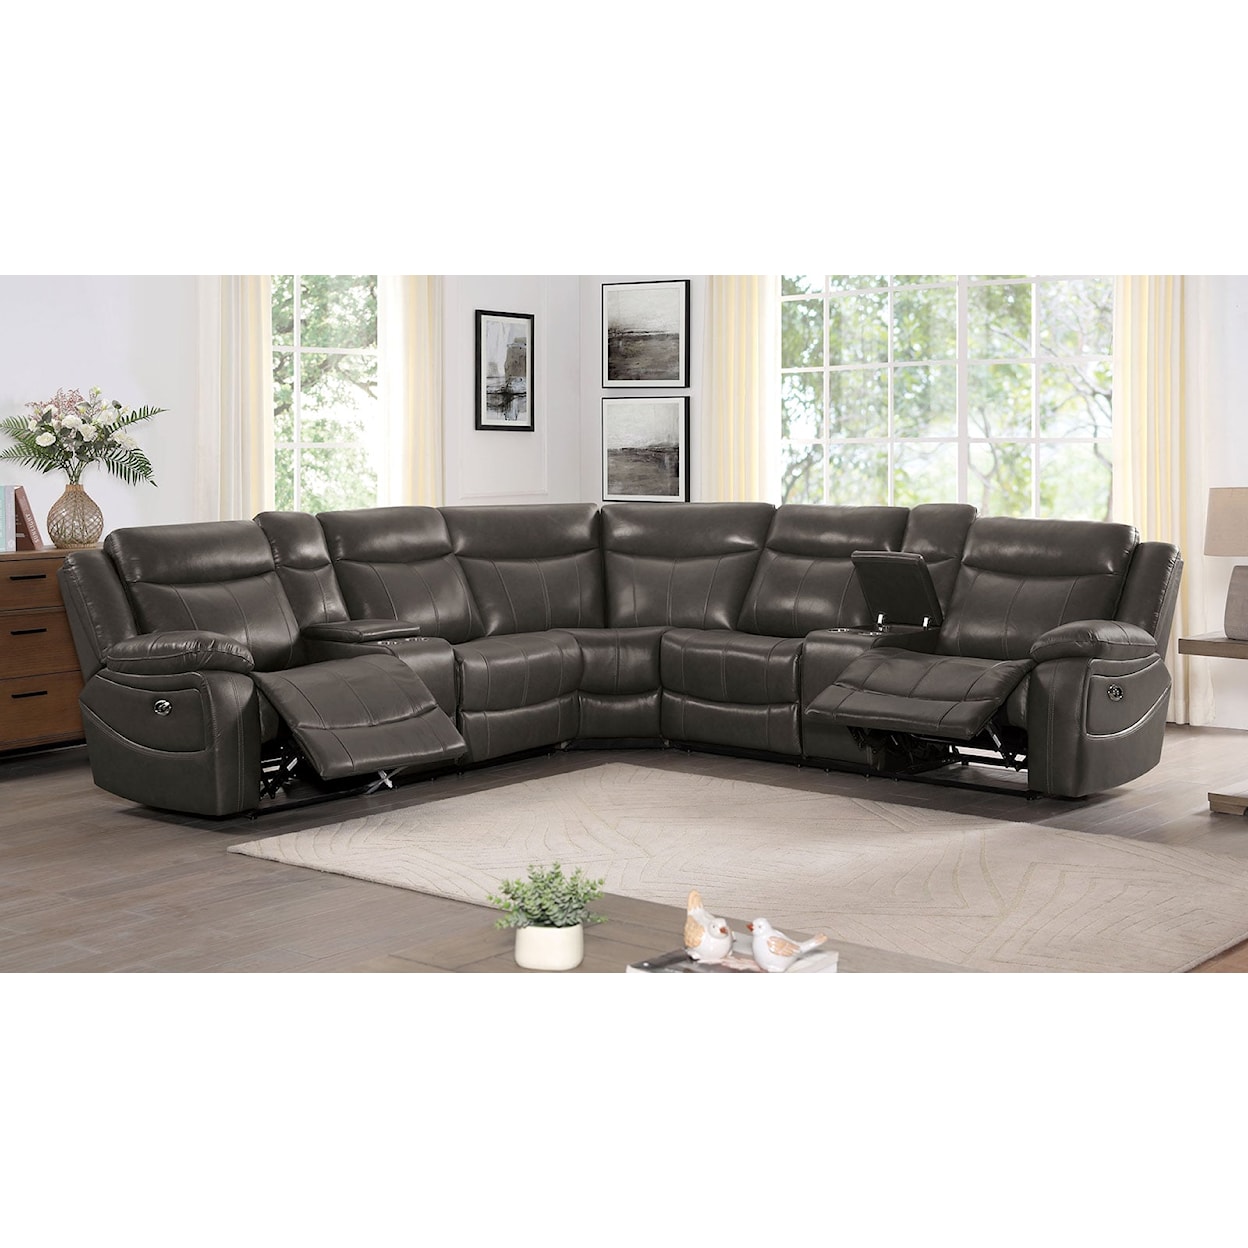 Furniture of America NORFOLK Power Reclining Sectional